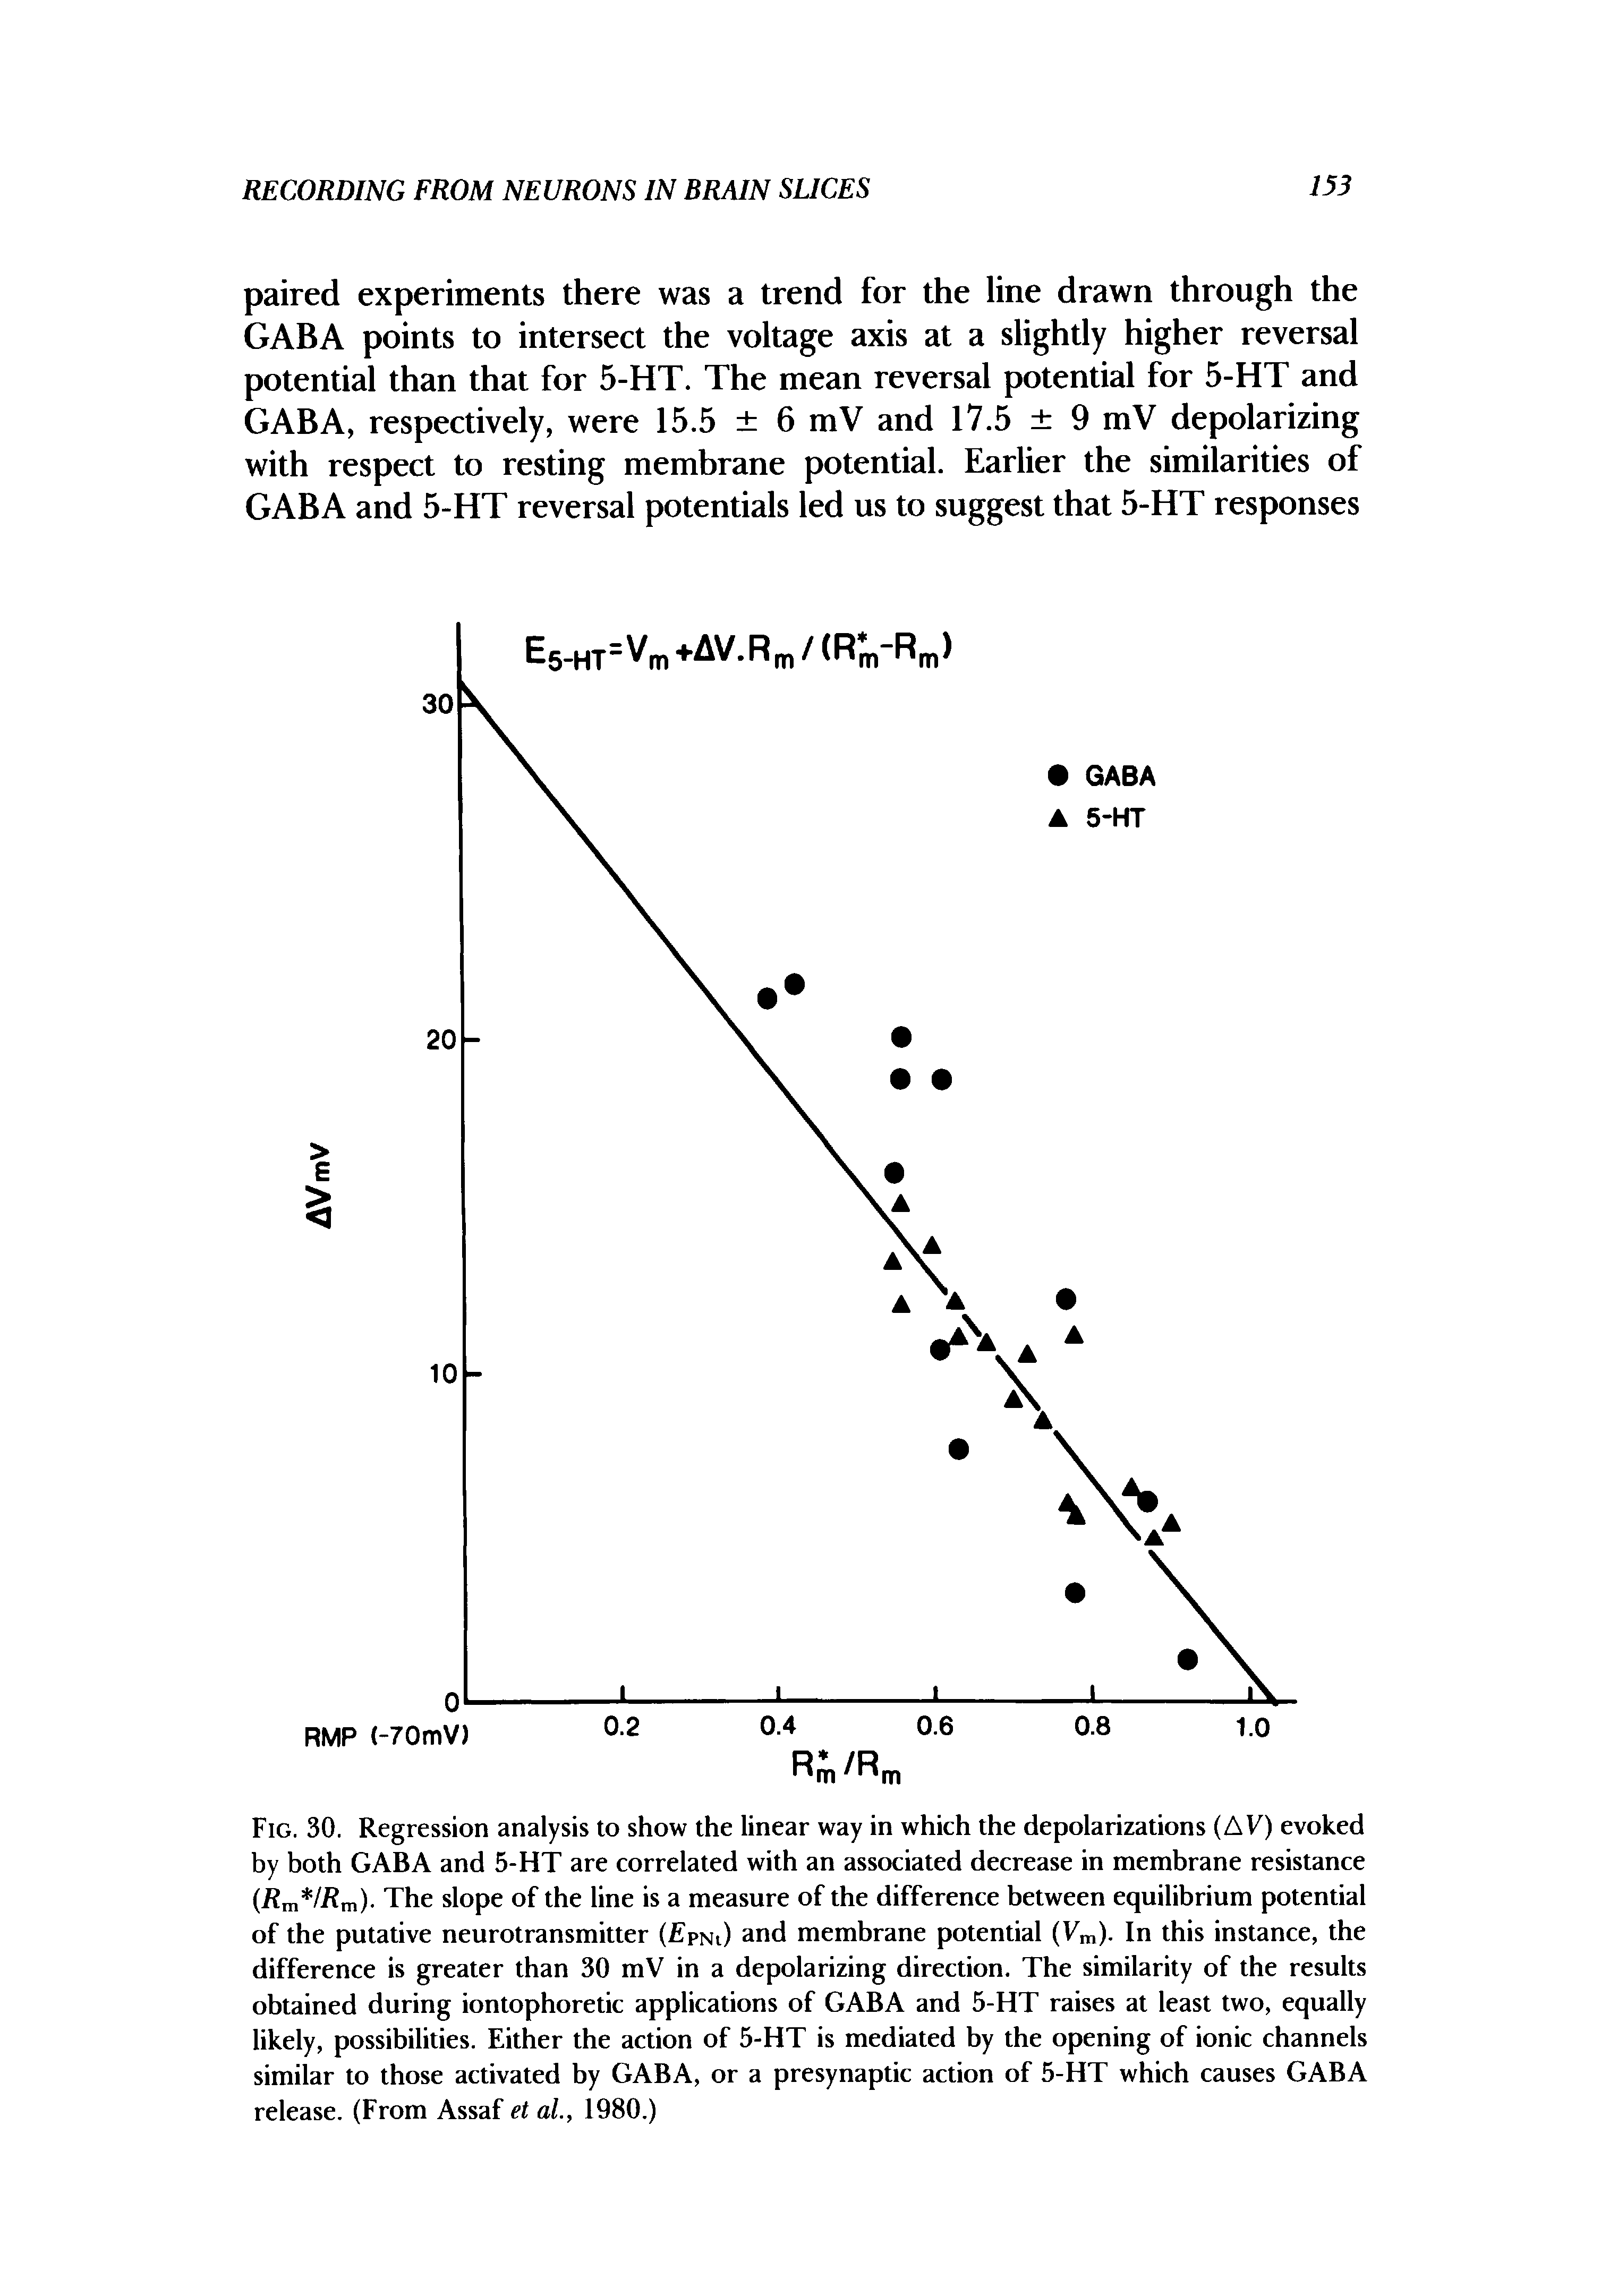 Fig. 30. Regression analysis to show the linear way in which the depolarizations (AV) evoked by both GABA and 5-HT are correlated with an associated decrease in membrane resistance Rm IRm)- The slope of the line is a measure of the difference between equilibrium potential of the putative neurotransmitter ( pni) and membrane potential (Tm). In this instance, the difference is greater than 30 mV in a depolarizing direction. The similarity of the results obtained during iontophoretic applications of GABA and 5-HT raises at least two, equally likely, possibilities. Either the action of 5-HT is mediated by the opening of ionic channels similar to those activated by GABA, or a presynaptic action of 5-HT which causes GABA release. (From Assaf et al, 1980.)...